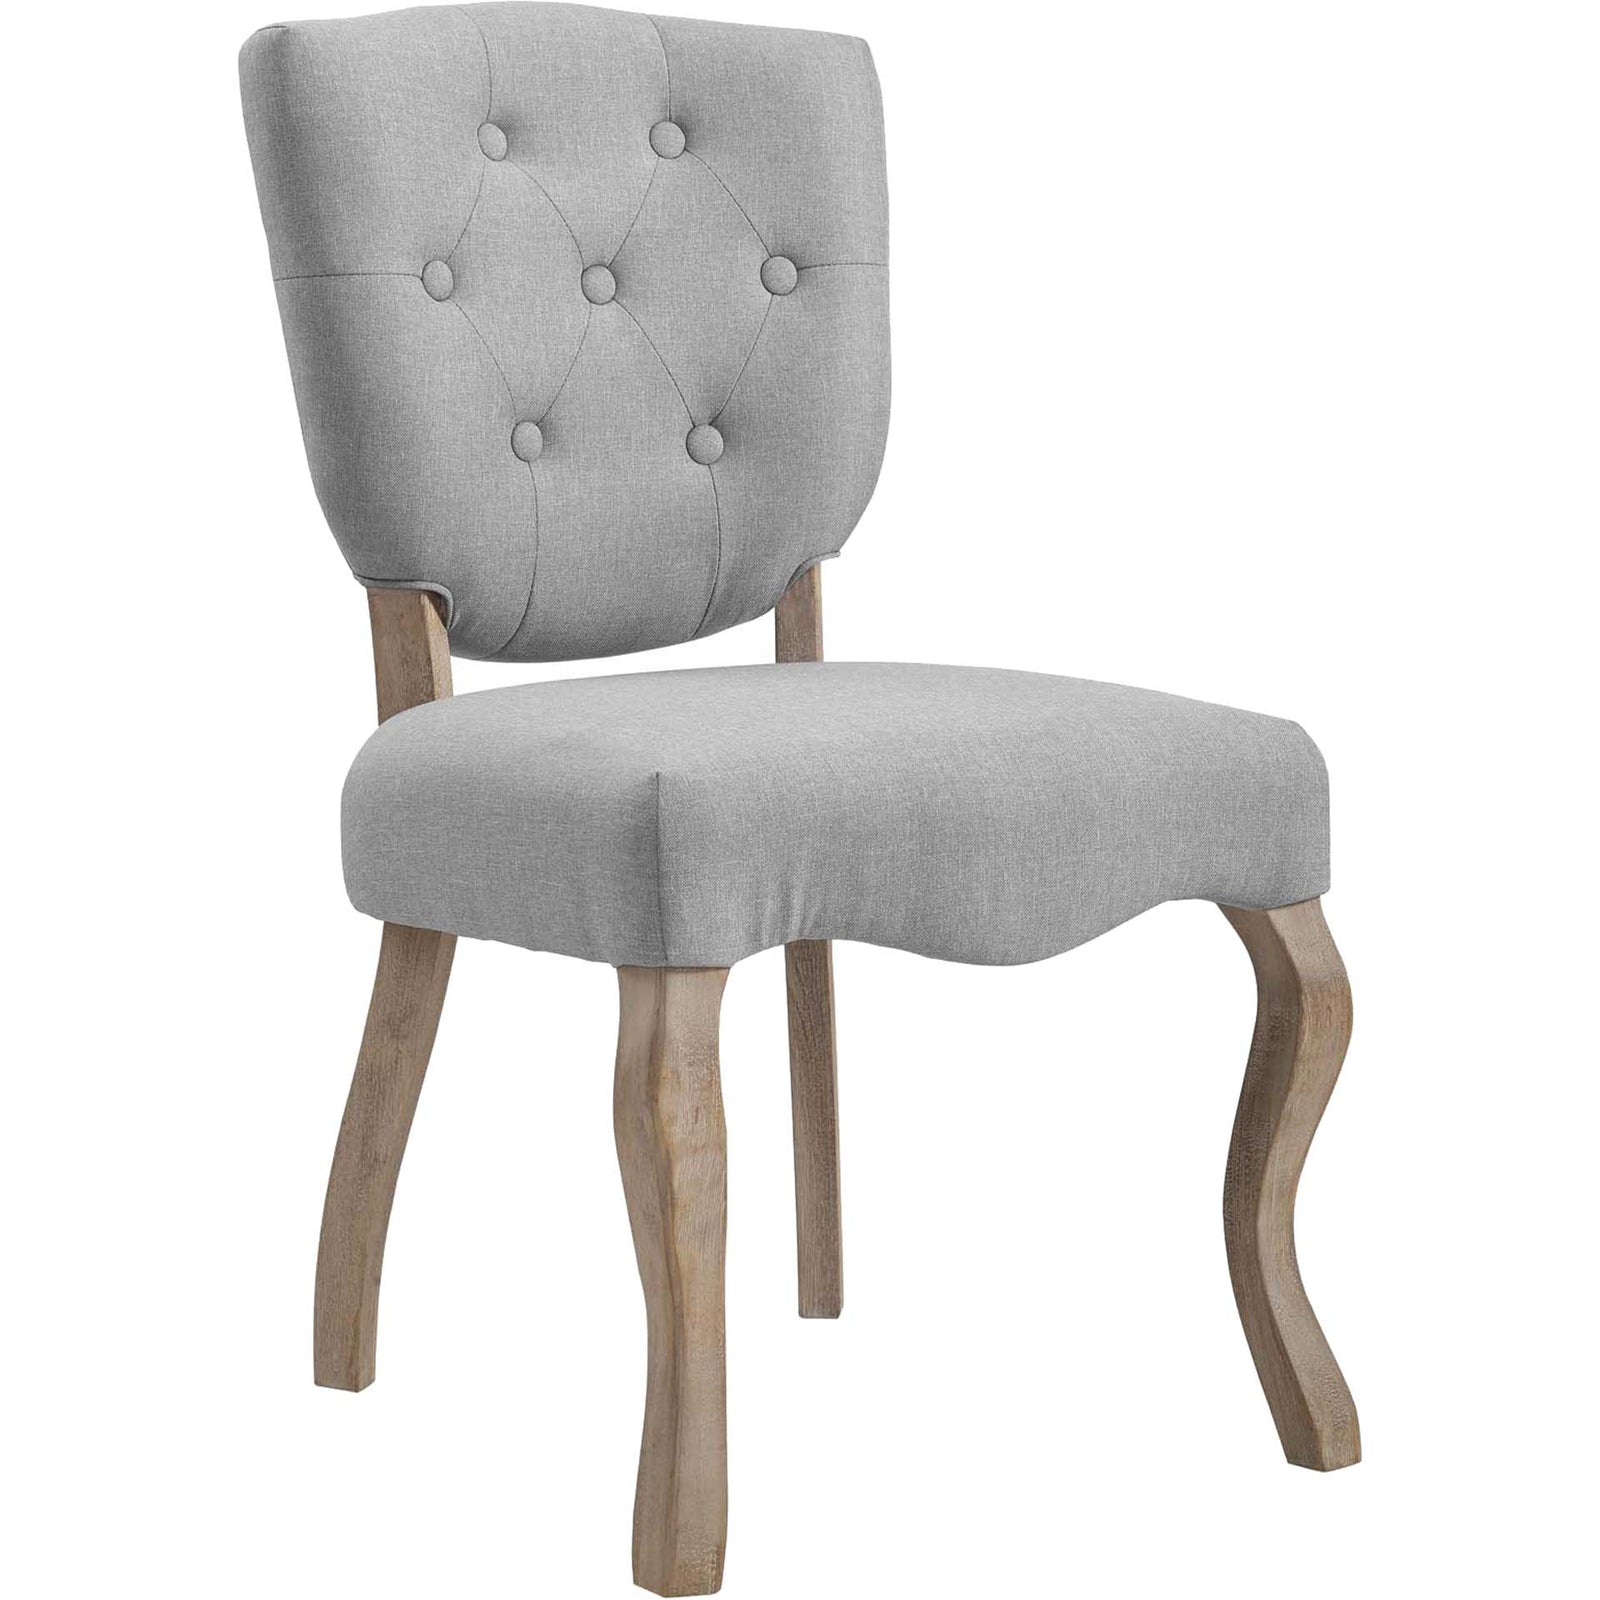 Angie Upholstered Dining Side Chair Light Gray